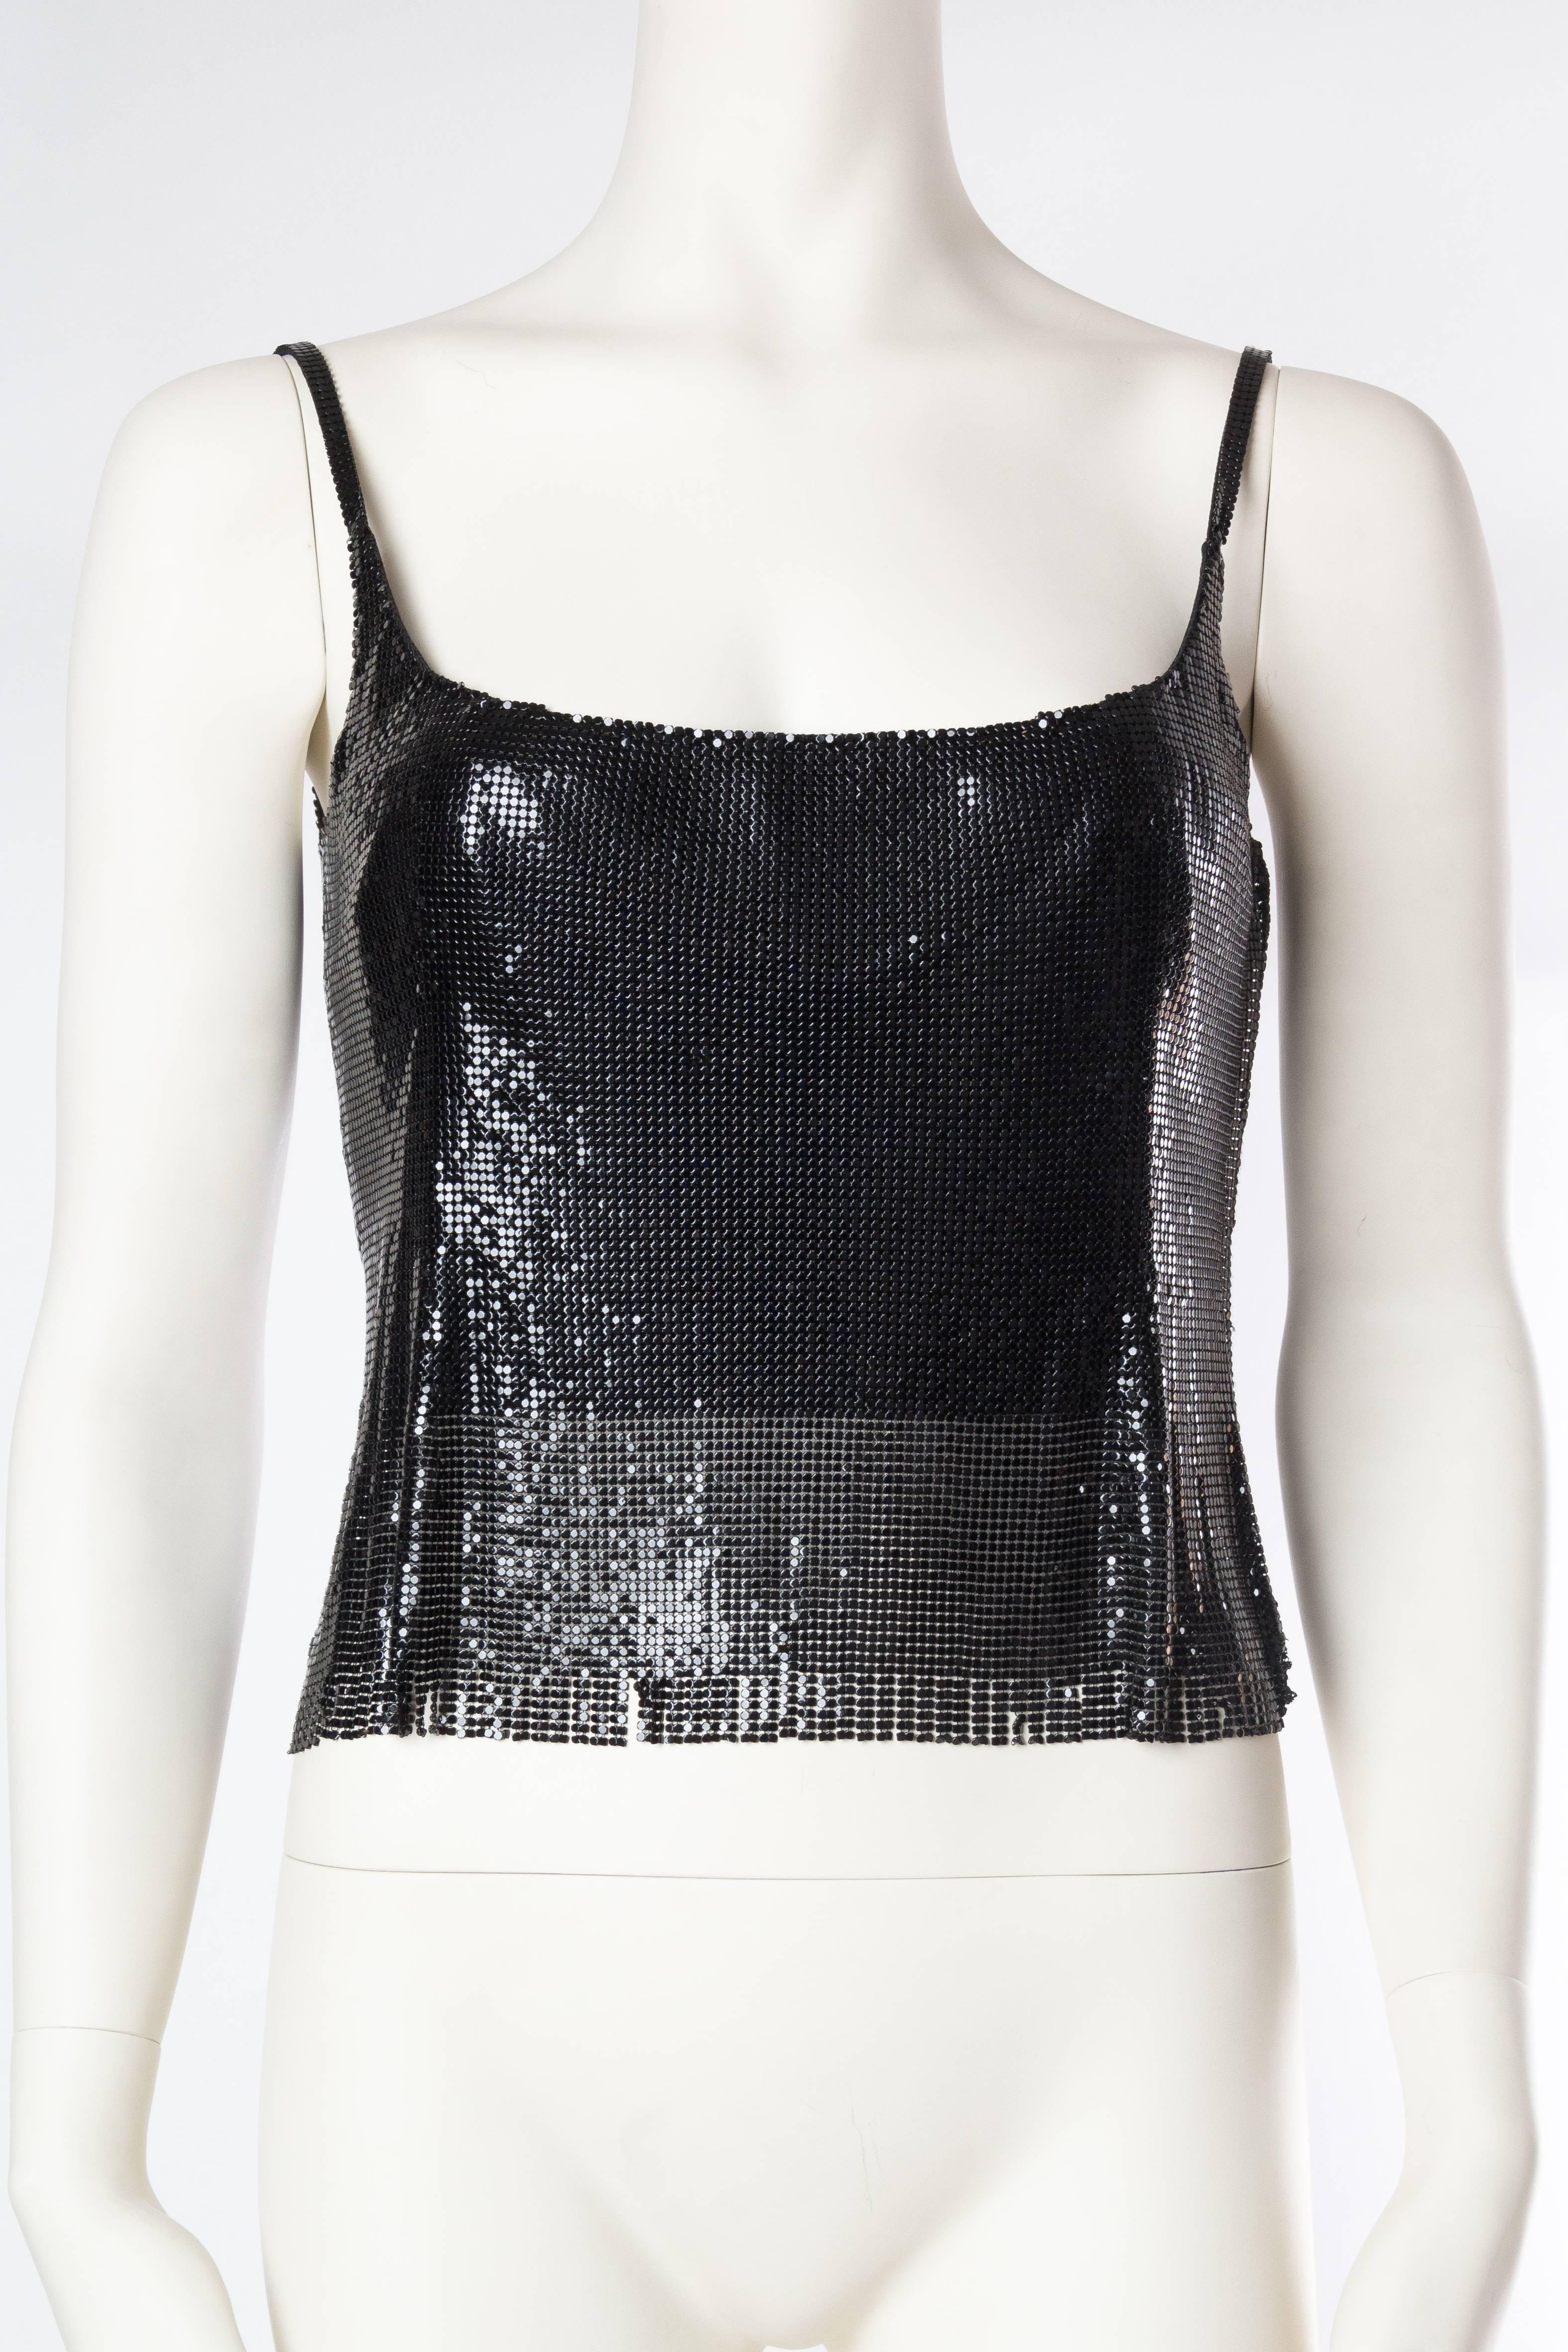 There is far more to the eye than just a black metal mesh top here. Gianni Versace is the only designer who painstakingly figured out a way to tailor the extremely tricky metal mesh to fit the curves of a woman's body. Numerous darts and tucks have